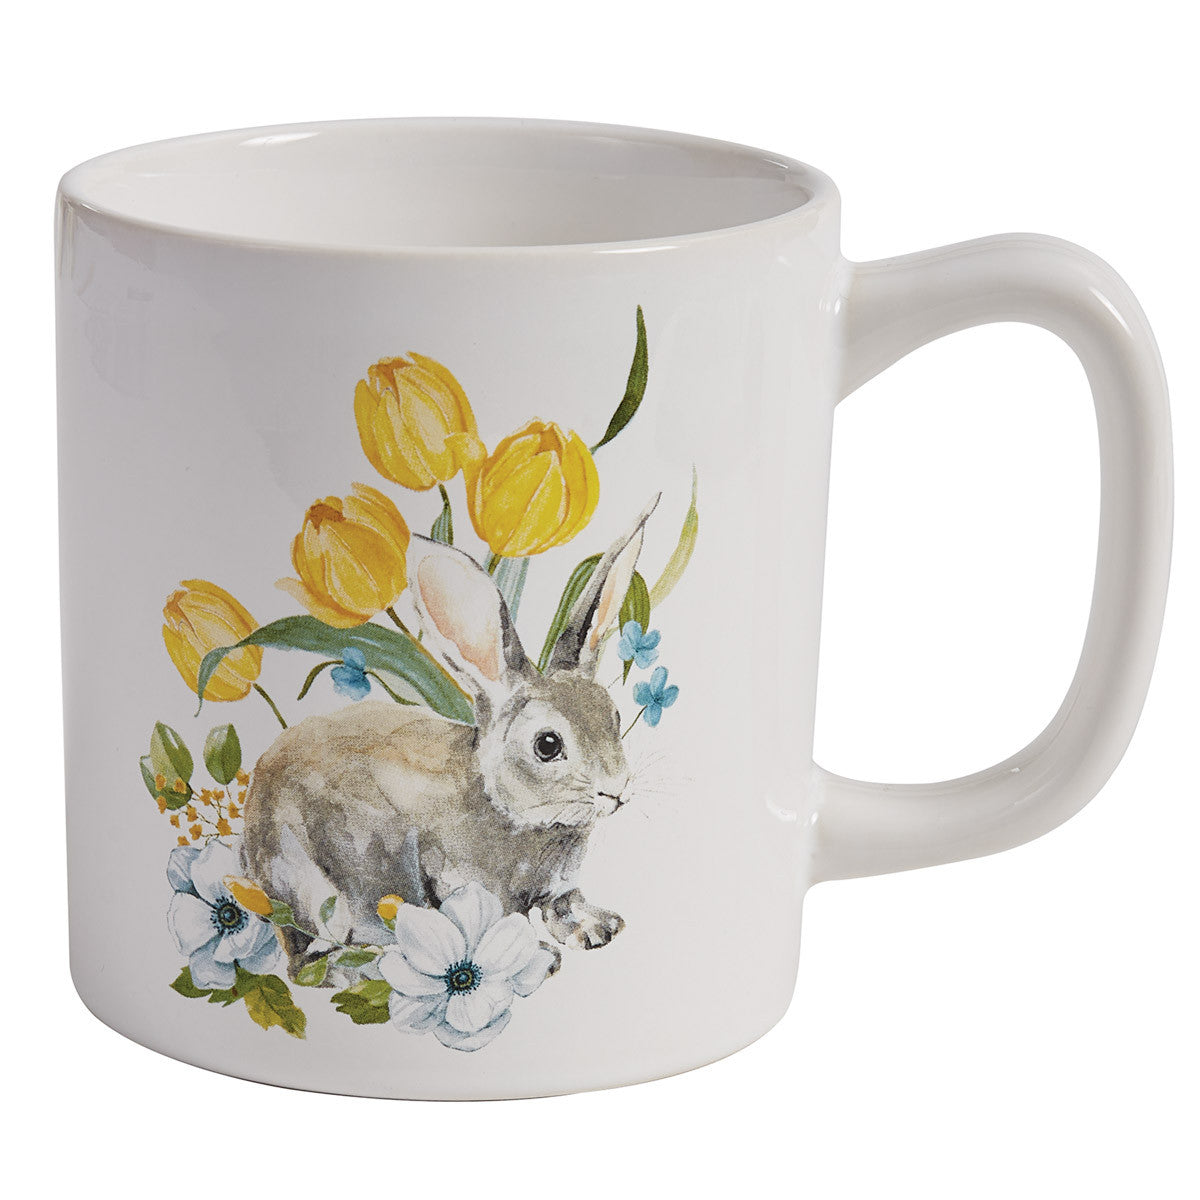 Bunny Plates (Set of Four) and Mugs (Sets of Four)